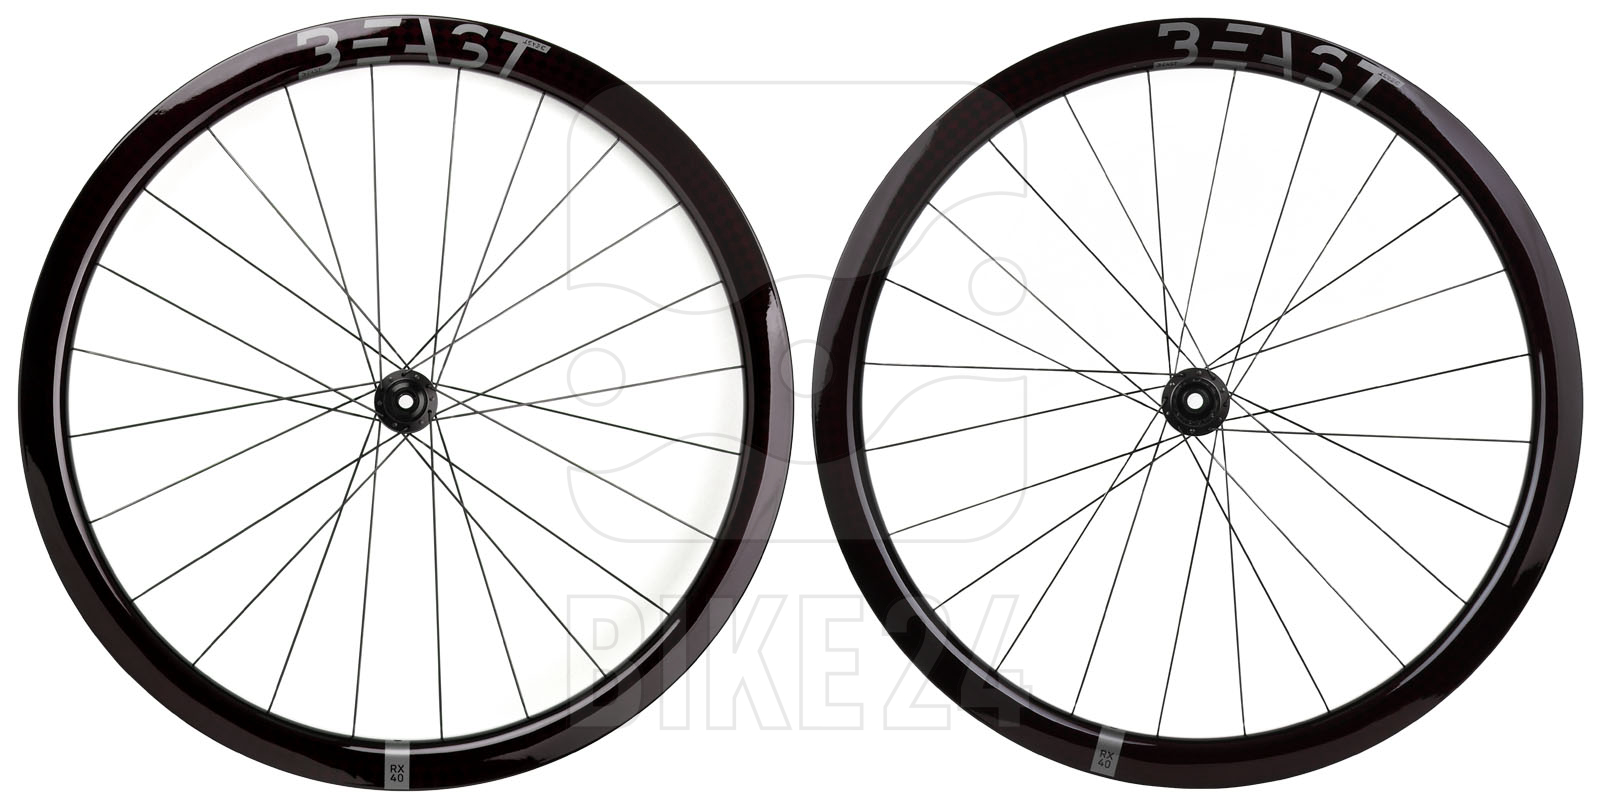 Picture of Beast Components RX40 + DT Swiss 240 Carbon Wheelset - Center Lock - FW: 12x100mm | RW: 12x142mm - SQUARE red